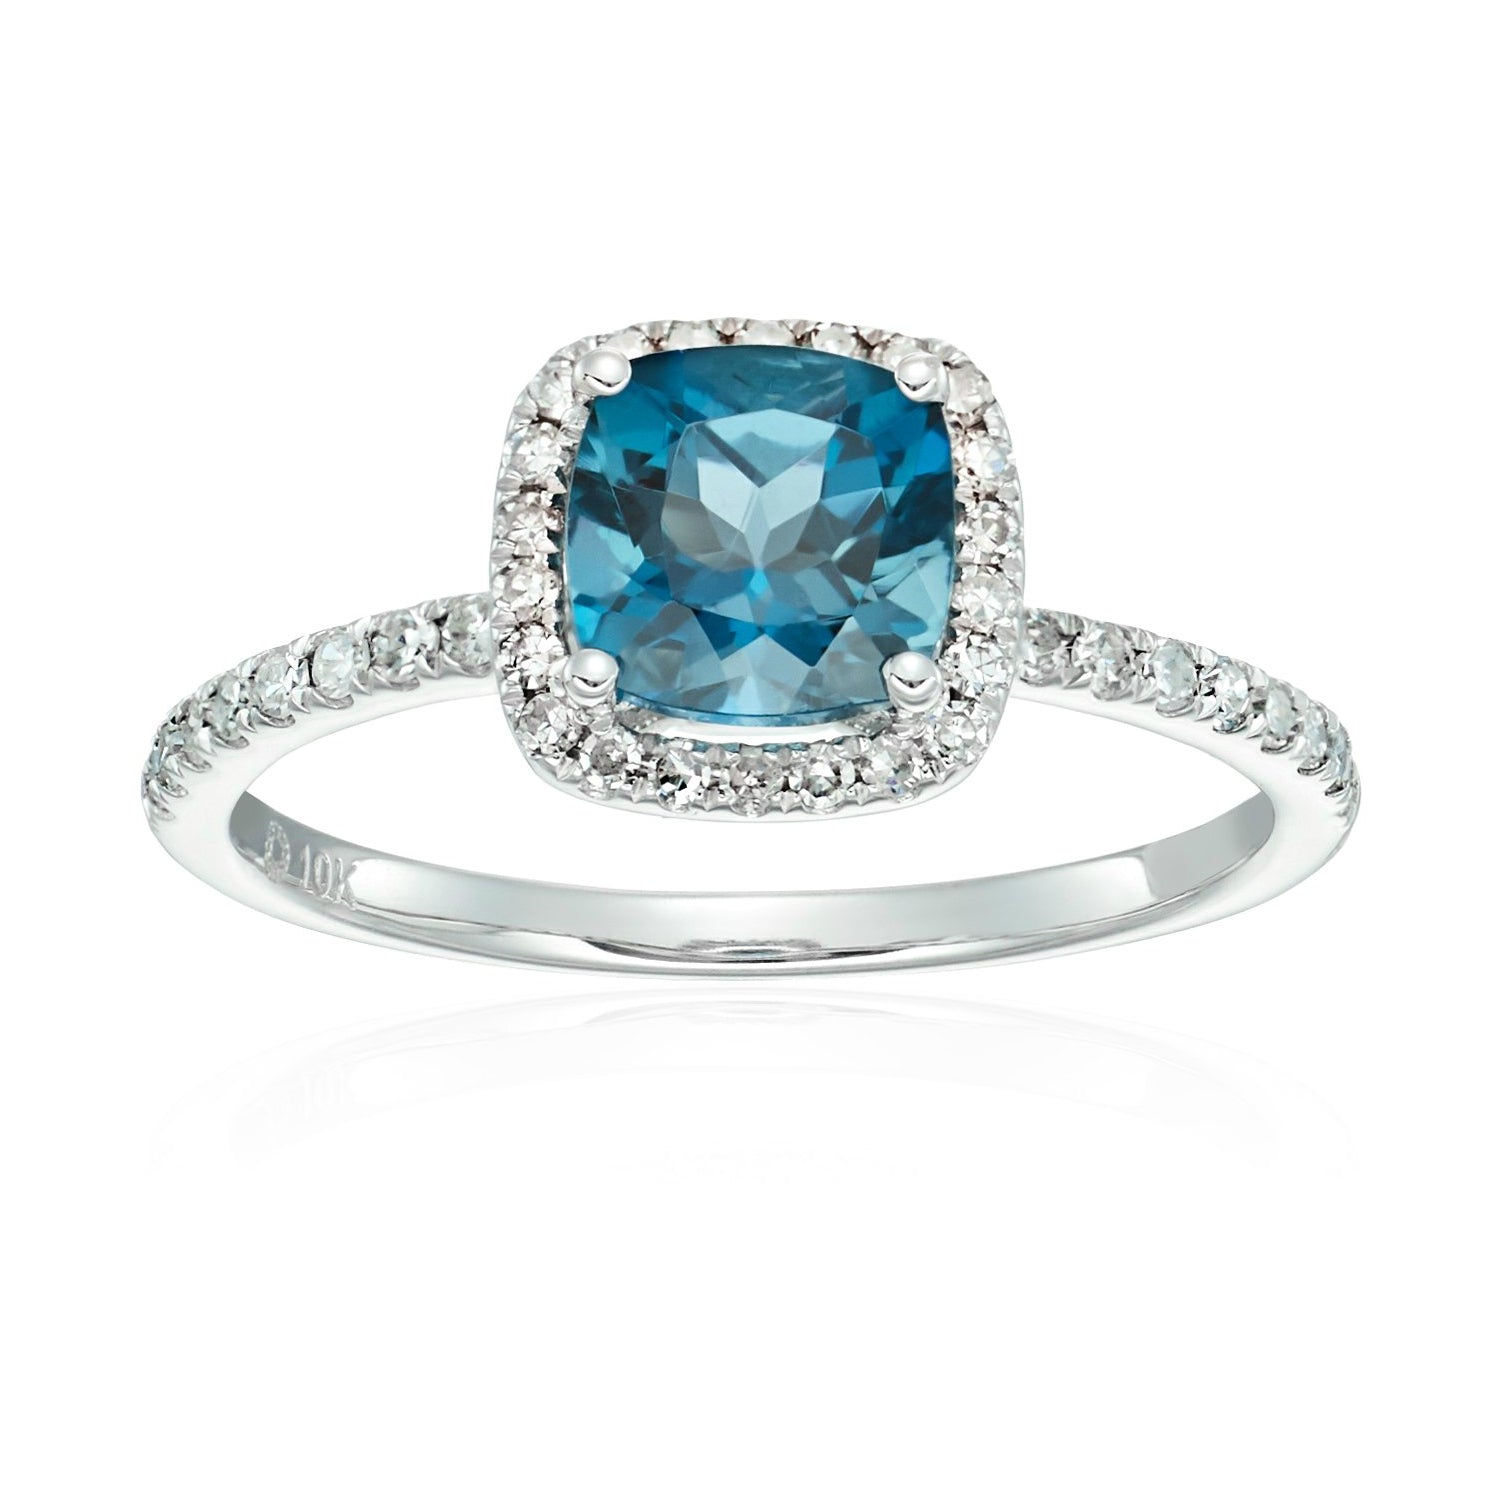 10k White Gold London Blue Topaz and Diamond Cushion Halo Engagement Ring (1/4cttw, H-I Color, I1-I2 Clarity), - pinctore